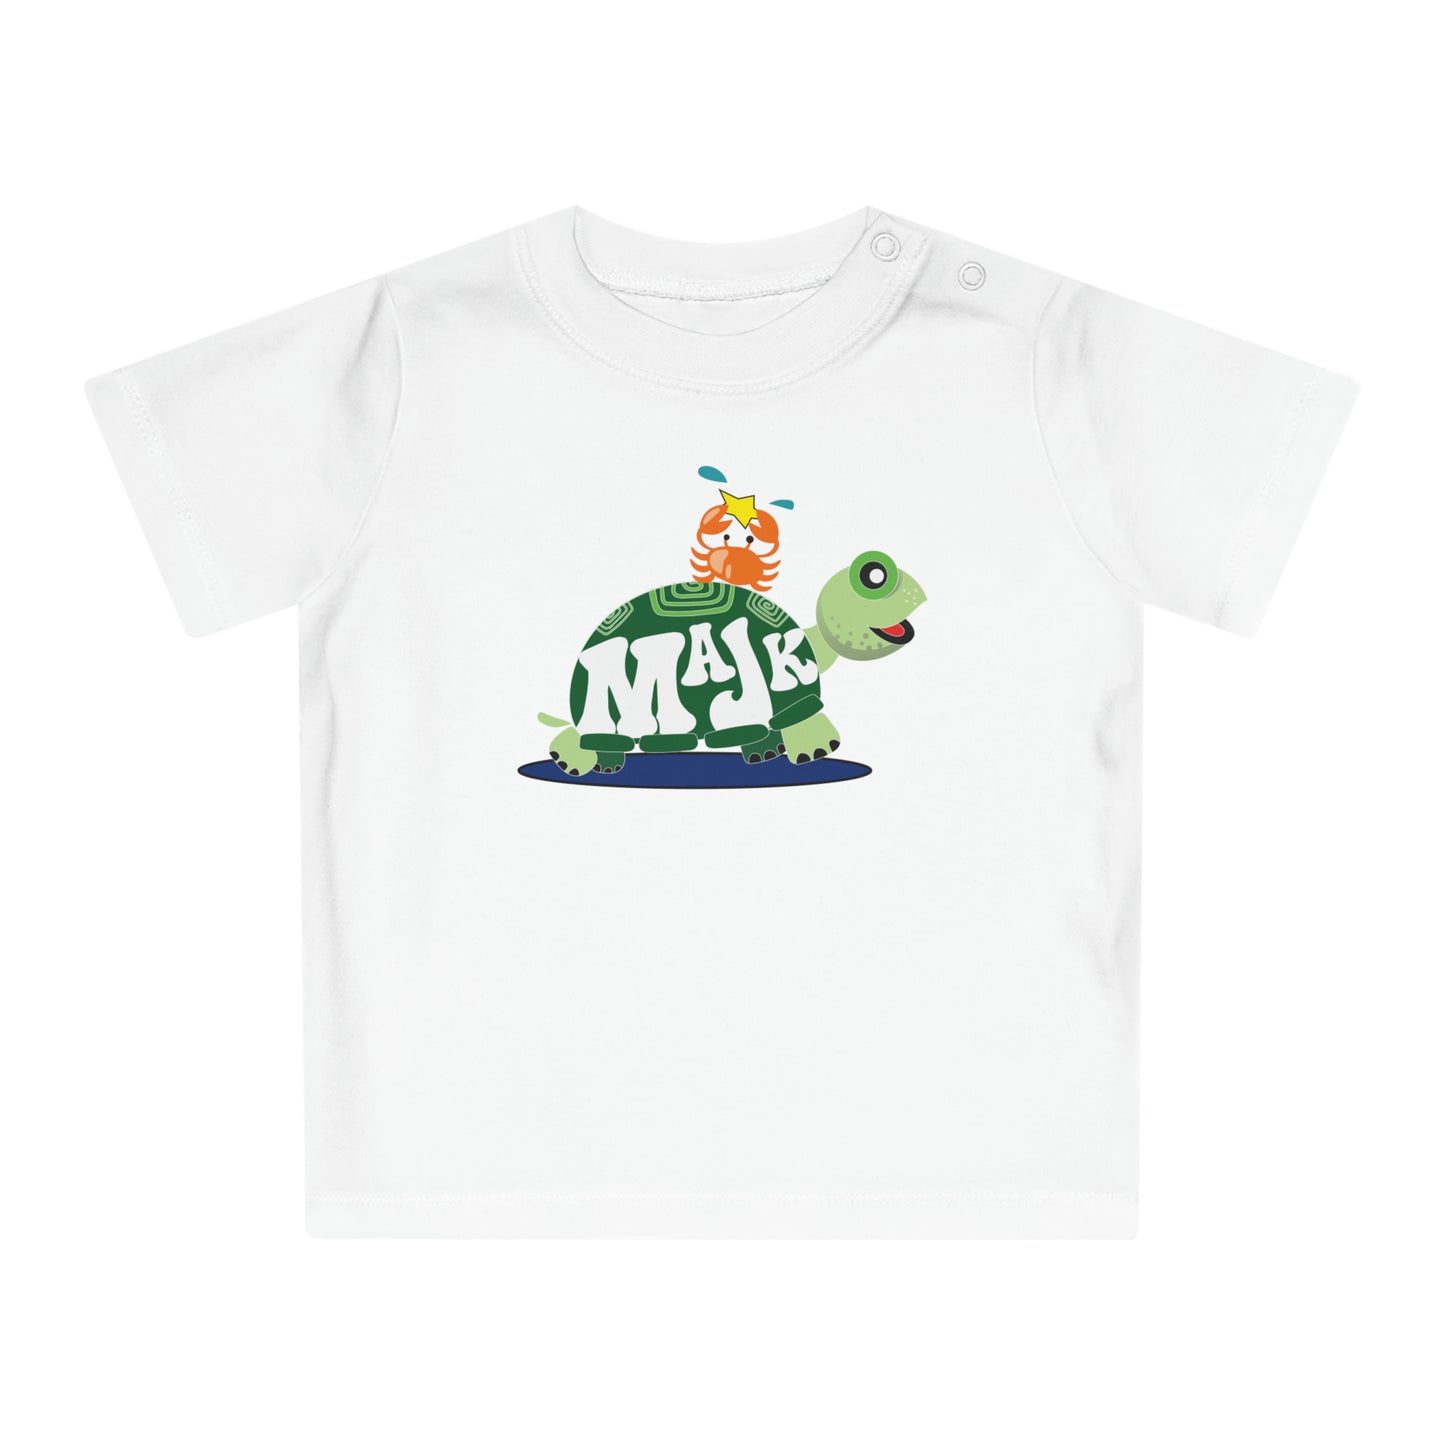 Baby T-Shirt -"Bestie's" Collection w/ unilateral shoulder snaps